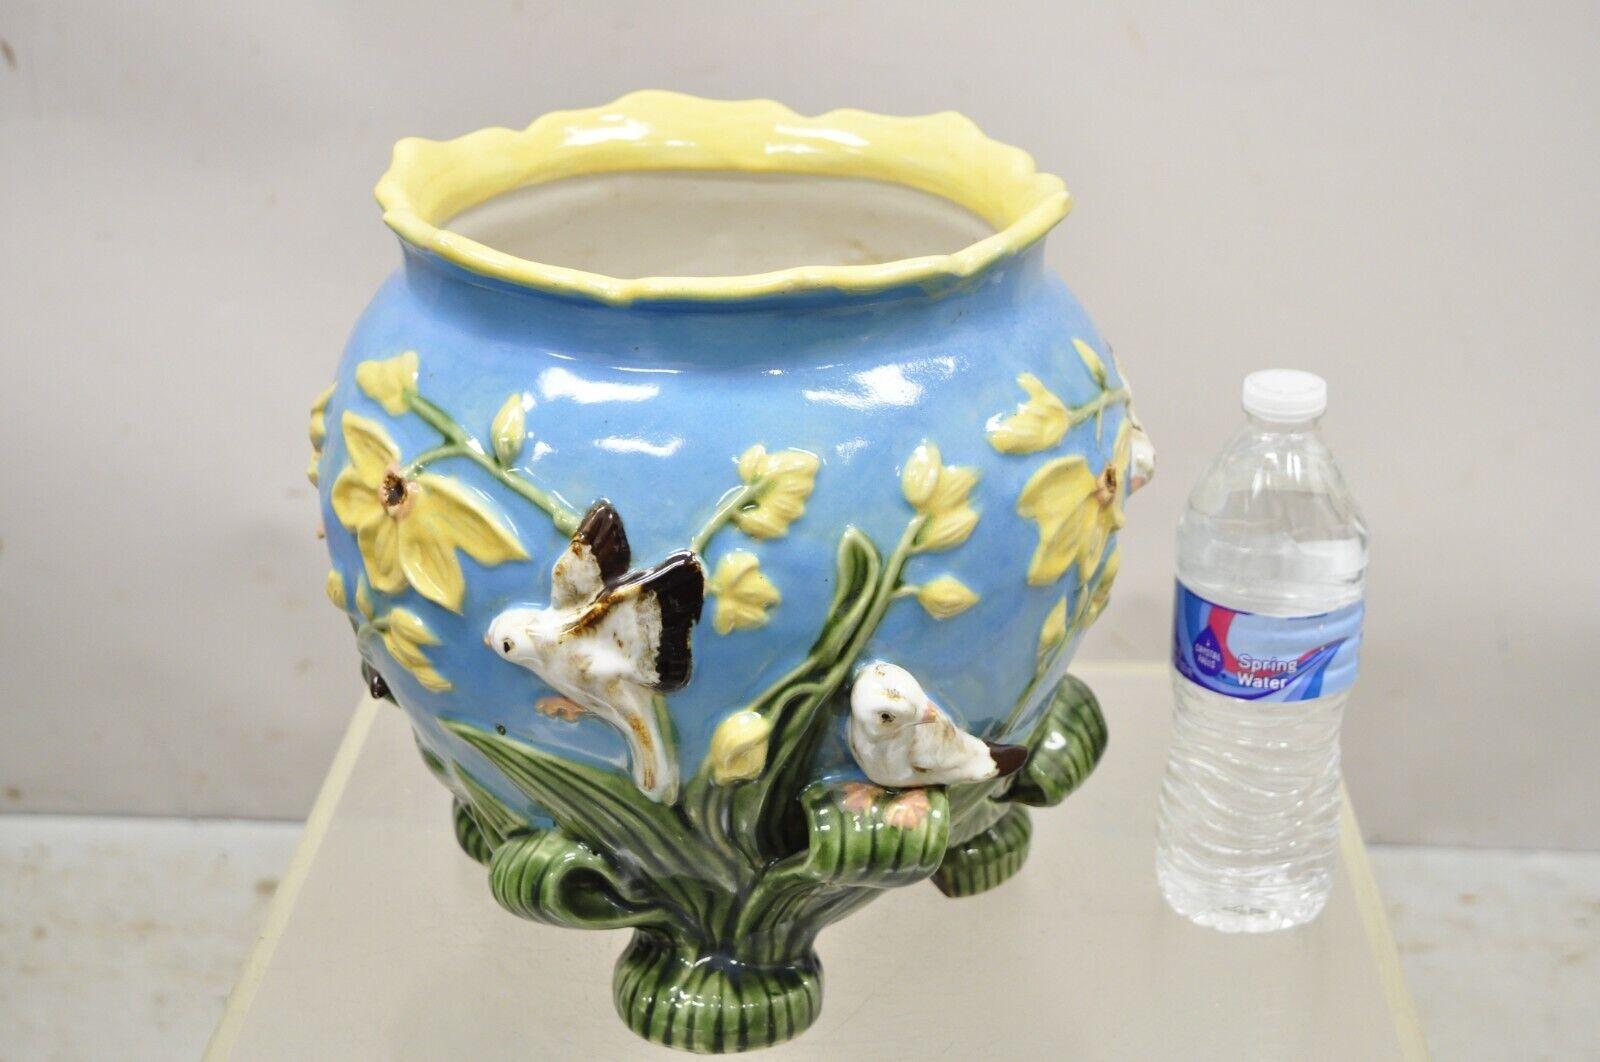 Vintage George Jones Majolica Style Jardiniere Art Nouveau Birds Cachepot Flower Pot. Item features remarkable color and detail. Authenticity unconfirmed. Believed to be a reproduction. Circa Mid to Late 20th Century. Measurements: 11